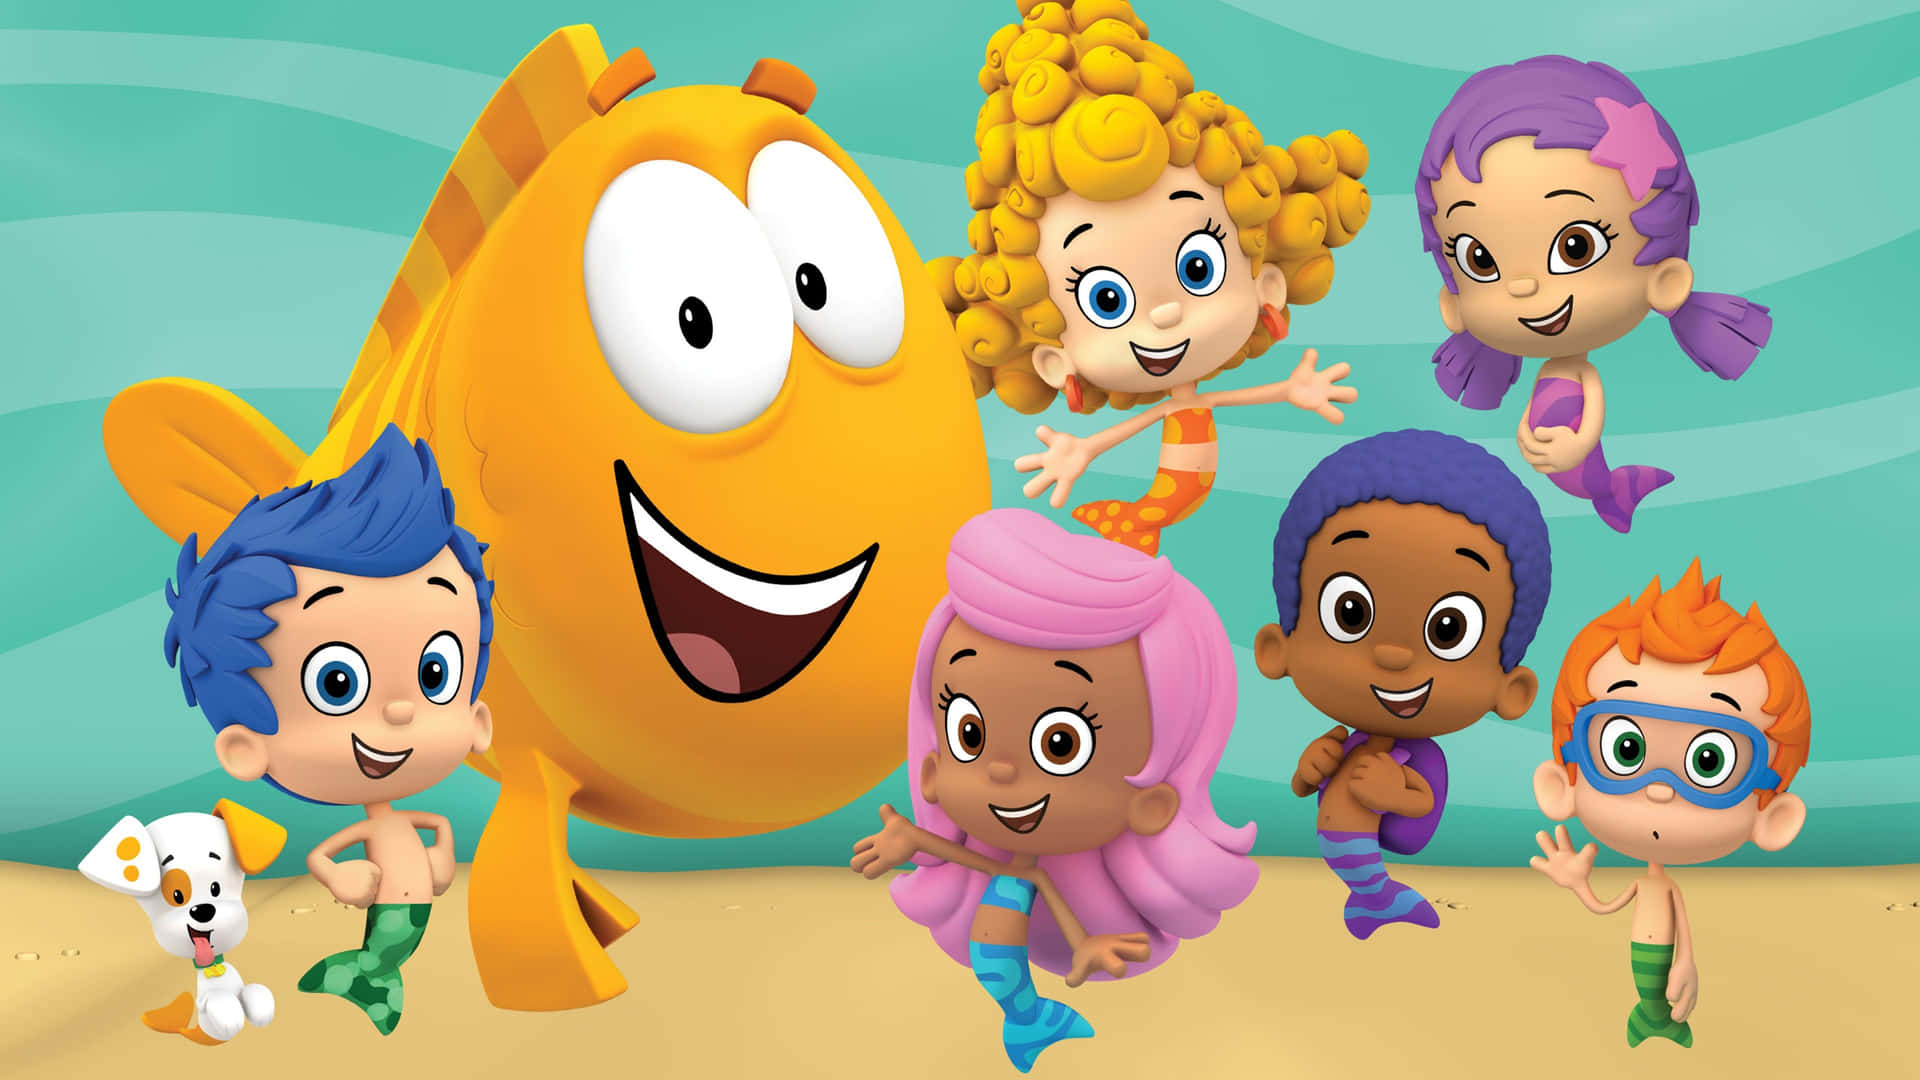 Bubble Guppies - A Cartoon With Many Characters